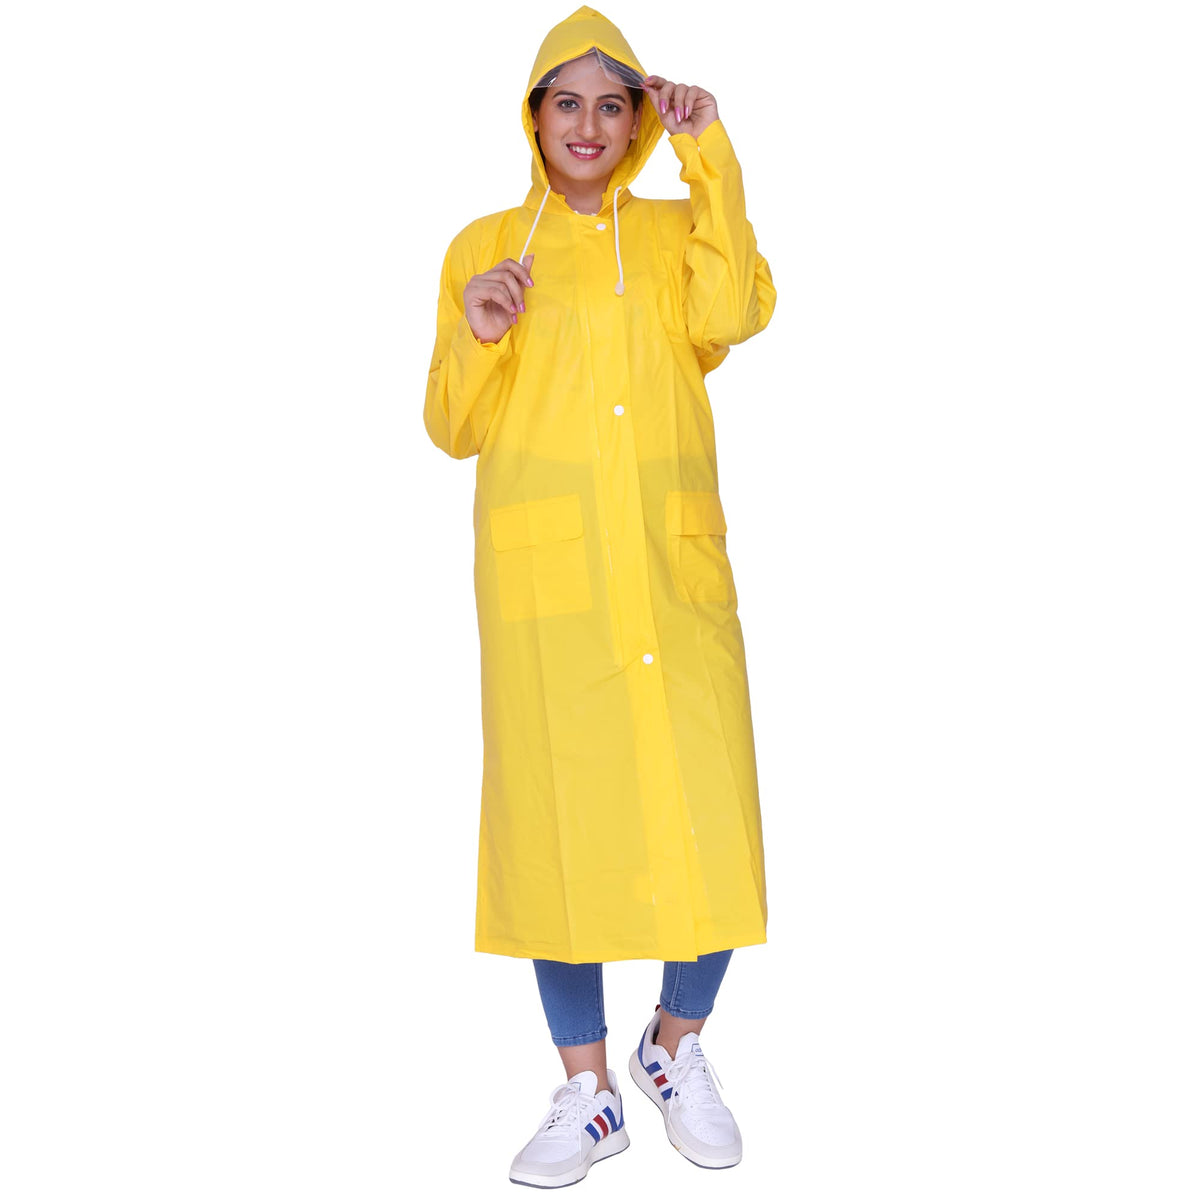 THE CLOWNFISH Indus Pro Series Women's Waterproof PVC Raincoat/Longcoat with Adjustable Hood- With Storage Bag (Yellow, L)